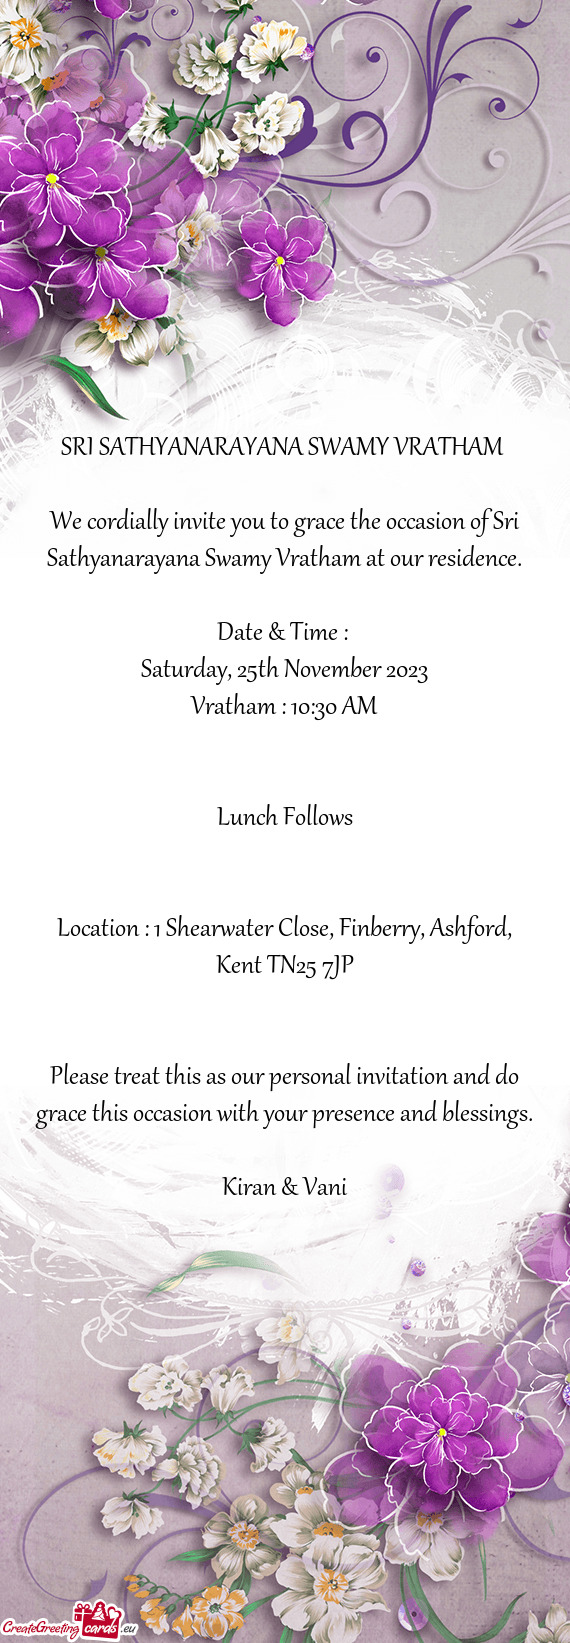 We cordially invite you to grace the occasion of Sri Sathyanarayana Swamy Vratham at our residence